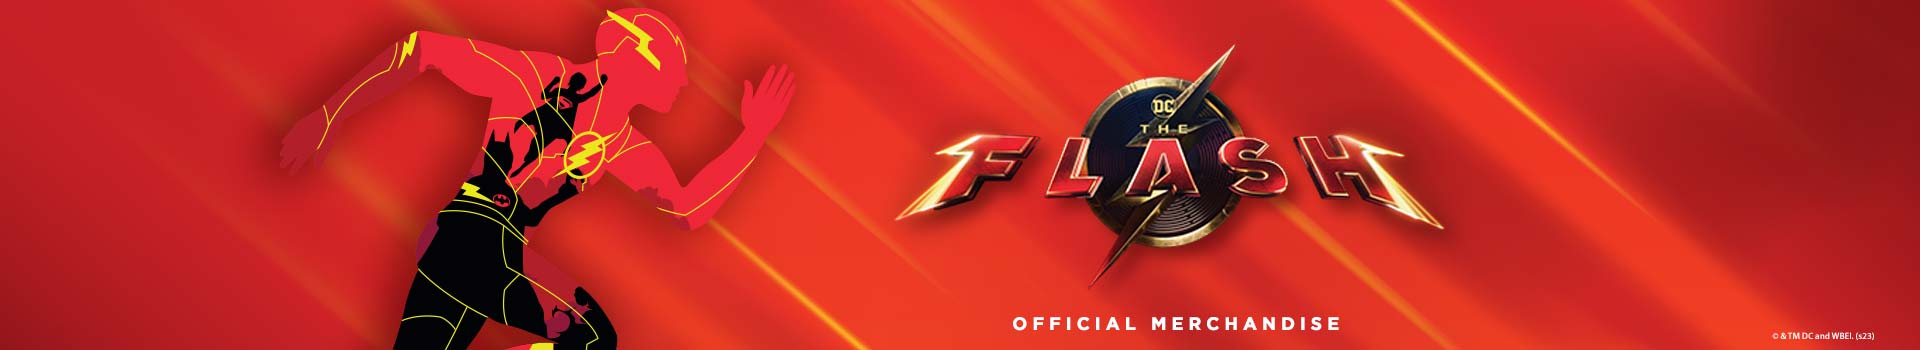 The Flash - Official Merchandise 